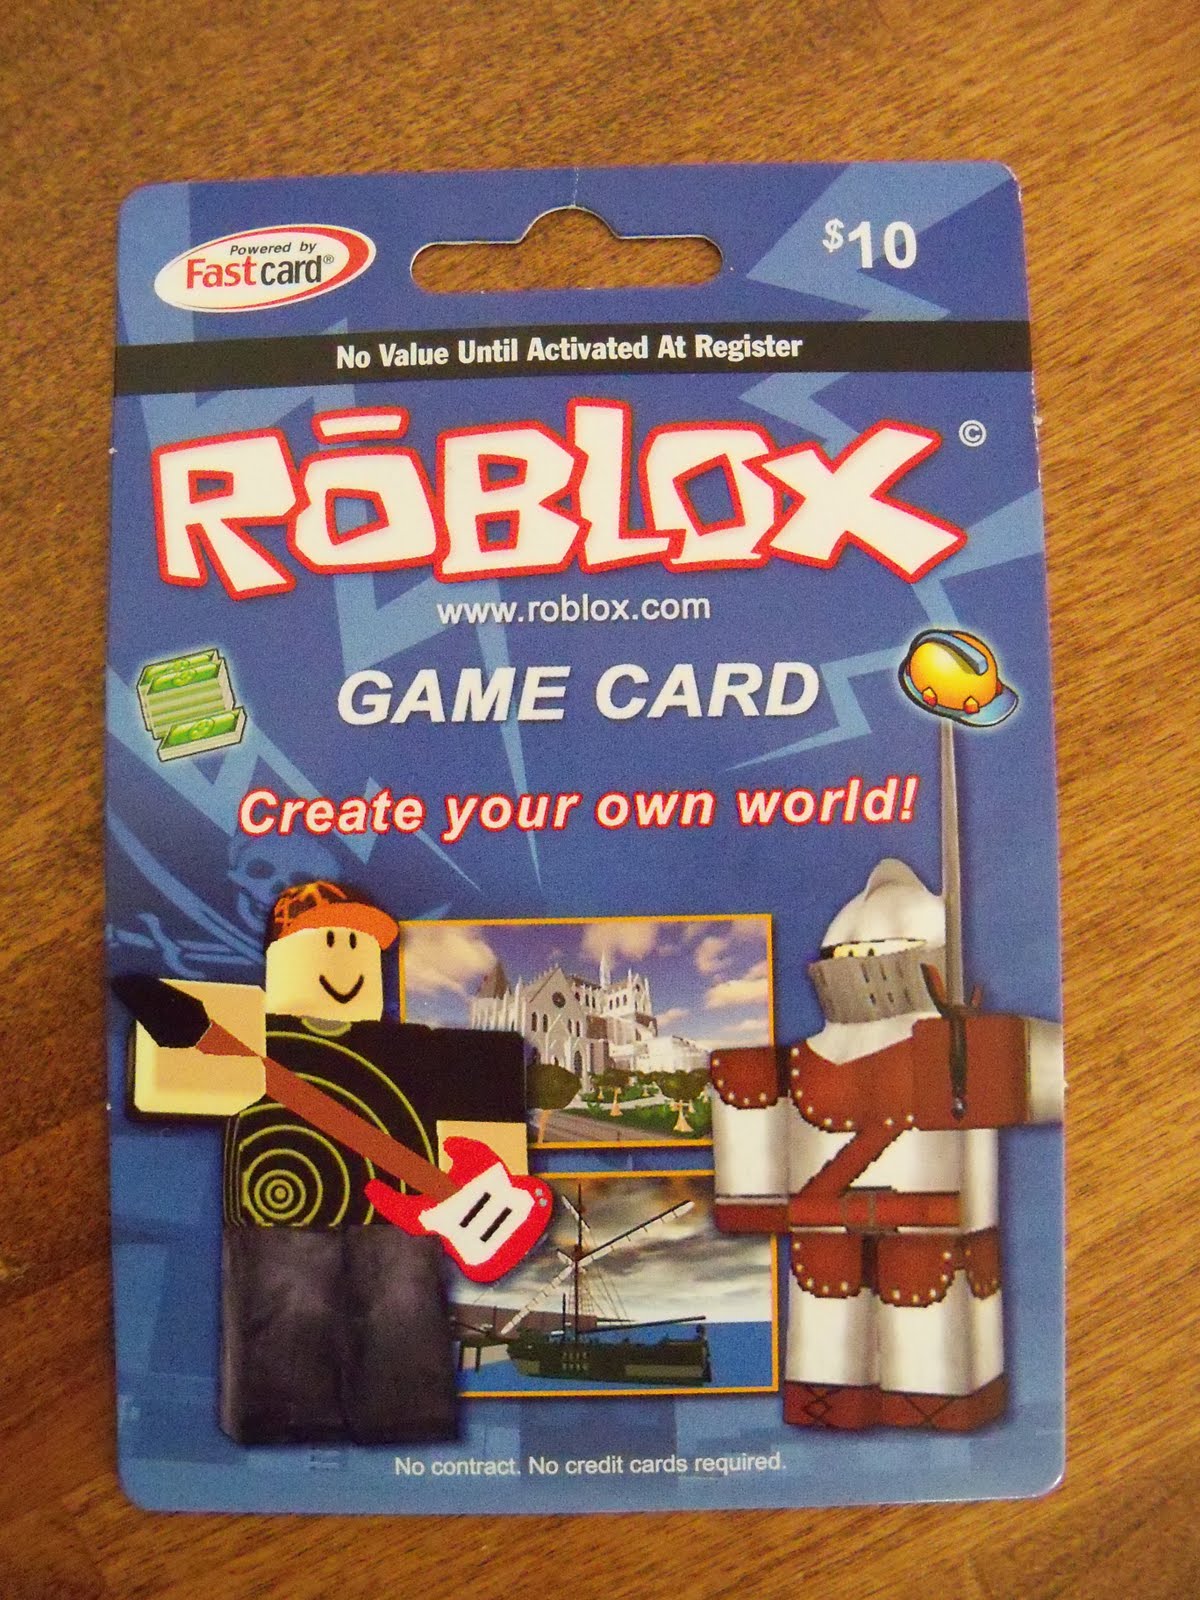 Savings Chatter Best Buy 10 Roblox Card For Free - roblox cards for sale near me